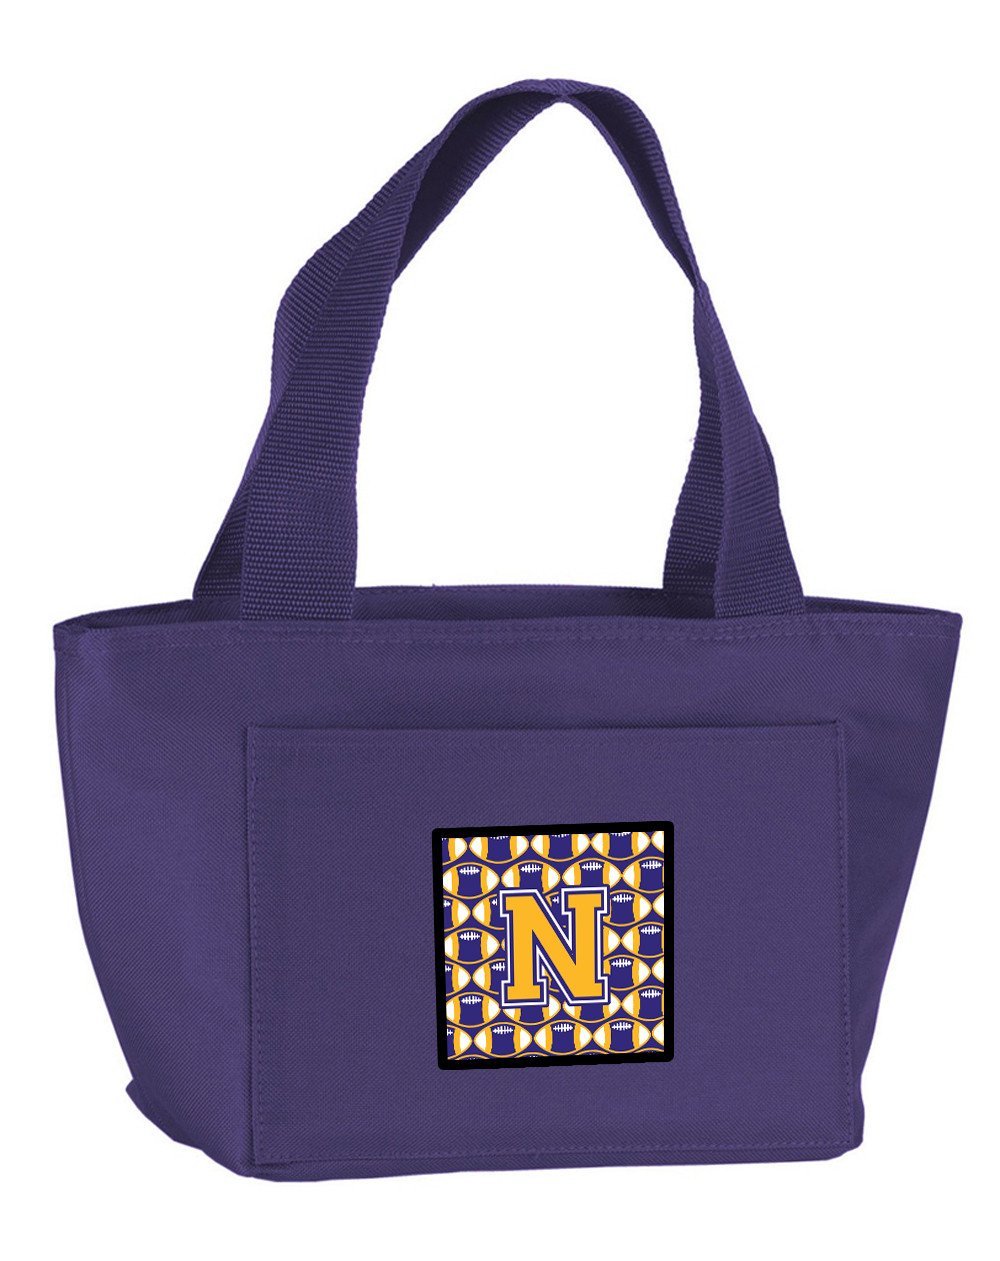 Letter N Football Purple and Gold Lunch Bag CJ1064-NPR-8808 by Caroline's Treasures